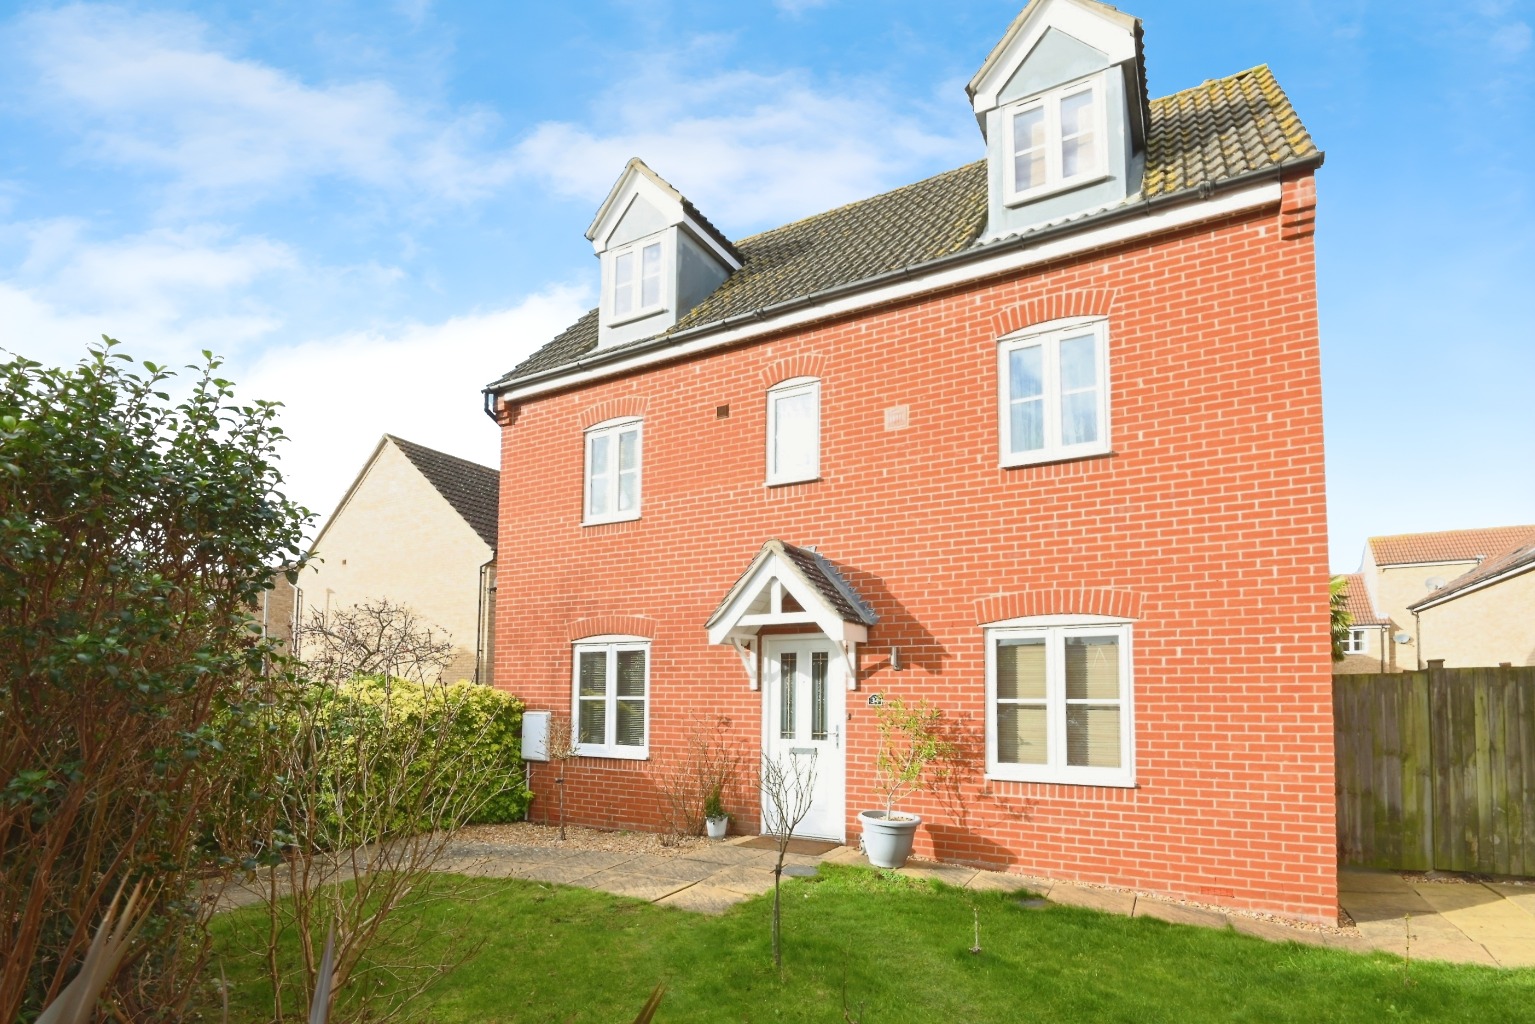 4 bed detached house for sale in Bevington Way, St Neots  - Property Image 1